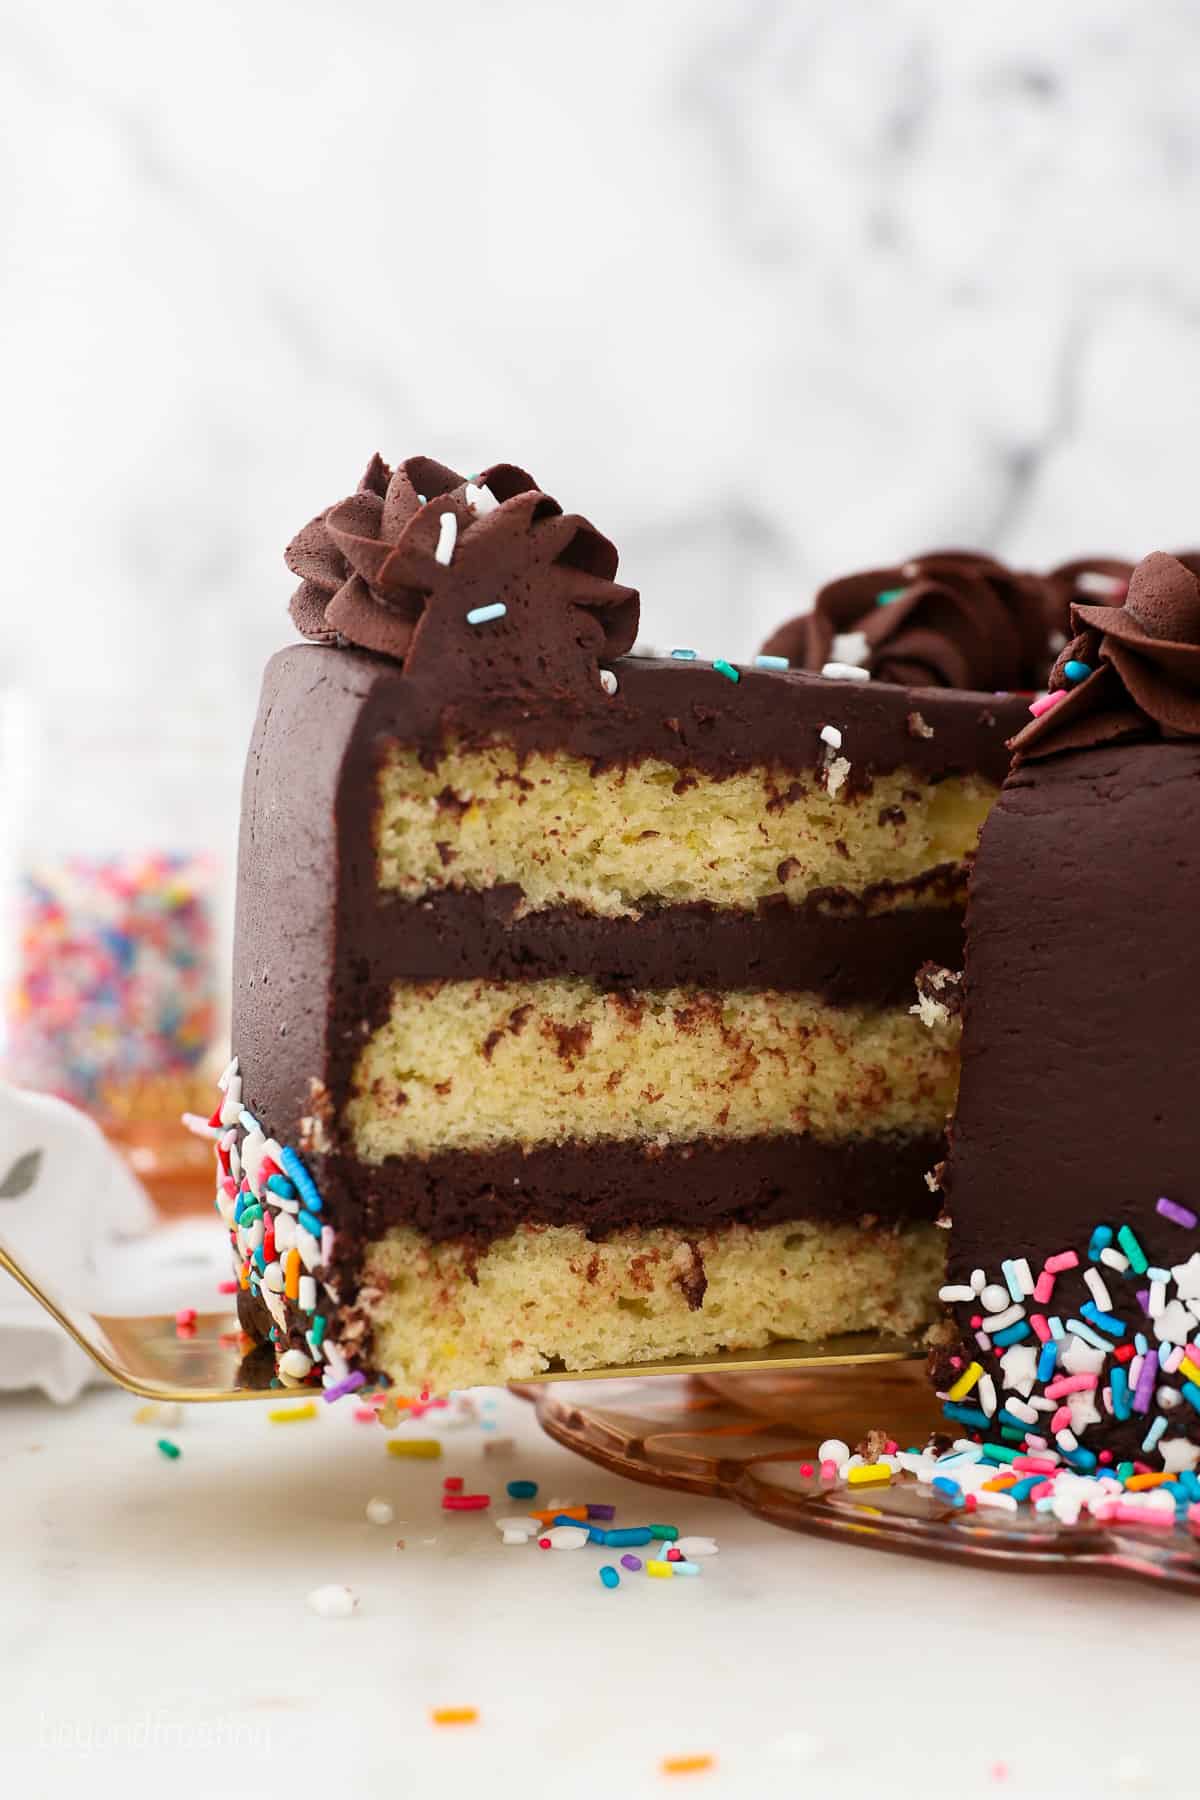 A slice of yellow layer cake with chocolate frosting being lifted from the rest of the cake.